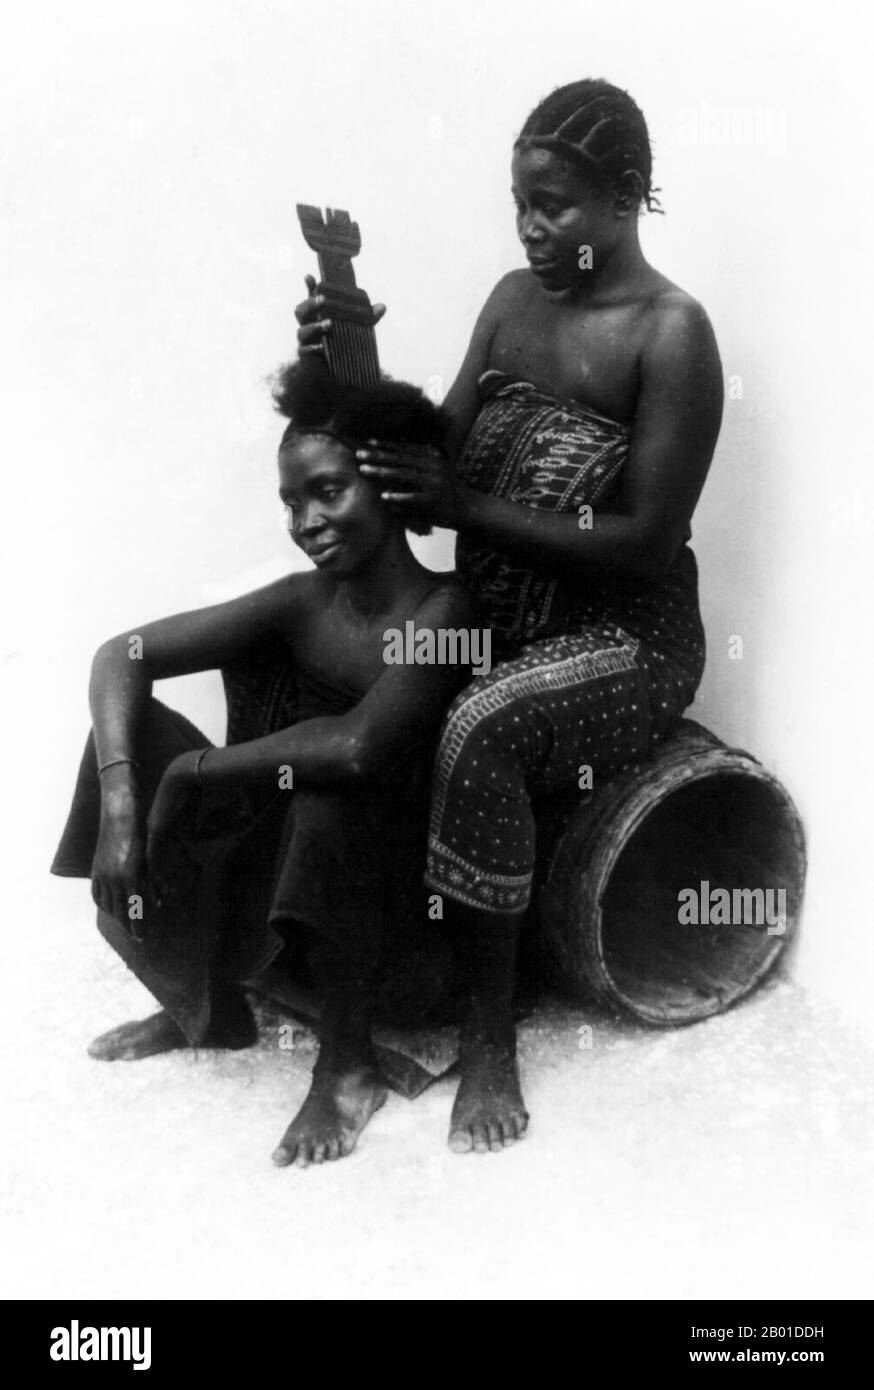 Tanzania: Swahili hair stylist at work, Zanzibar, British East Africa, c. 1890s.   Both women are wearing kanga, or printed cotton wrap-around skirts characteristic of the area.  The Swahili people are a Bantu ethnic group and culture found in East Africa, mainly in the coastal regions and the islands of Kenya, Tanzania and northern Mozambique. The name Swahili is derived from the Arabic word Sawahil, meaning 'coastal dwellers', and they speak the Swahili language.  The Swahili are original Bantu inhabitants on the coast of East Africa, in Kenya, Tanzania and Mozambique. Stock Photo